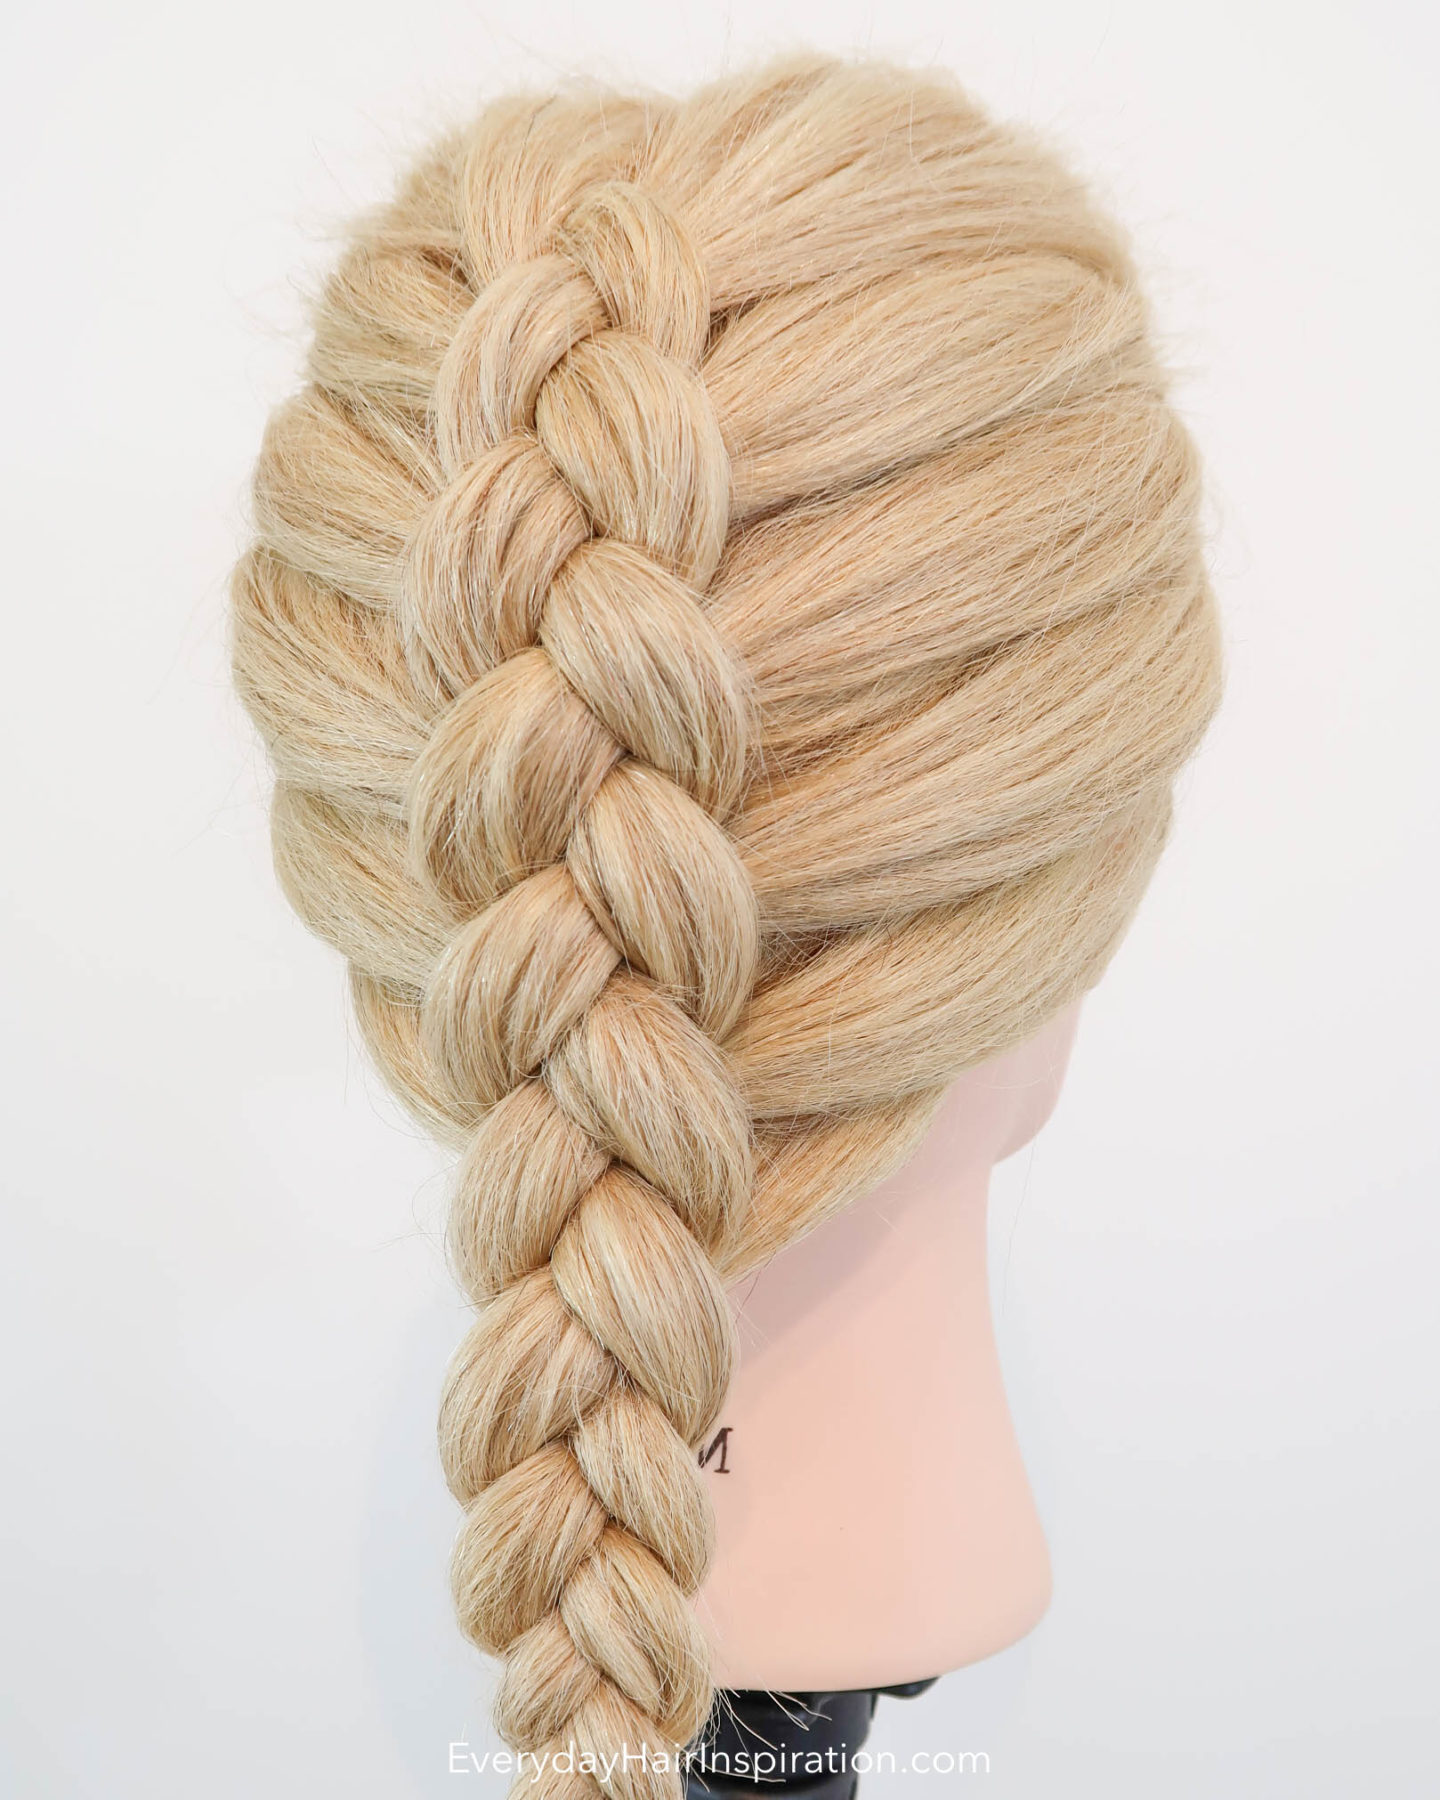 Blonde hairdresser doll with a single dutch braid down the back of the head